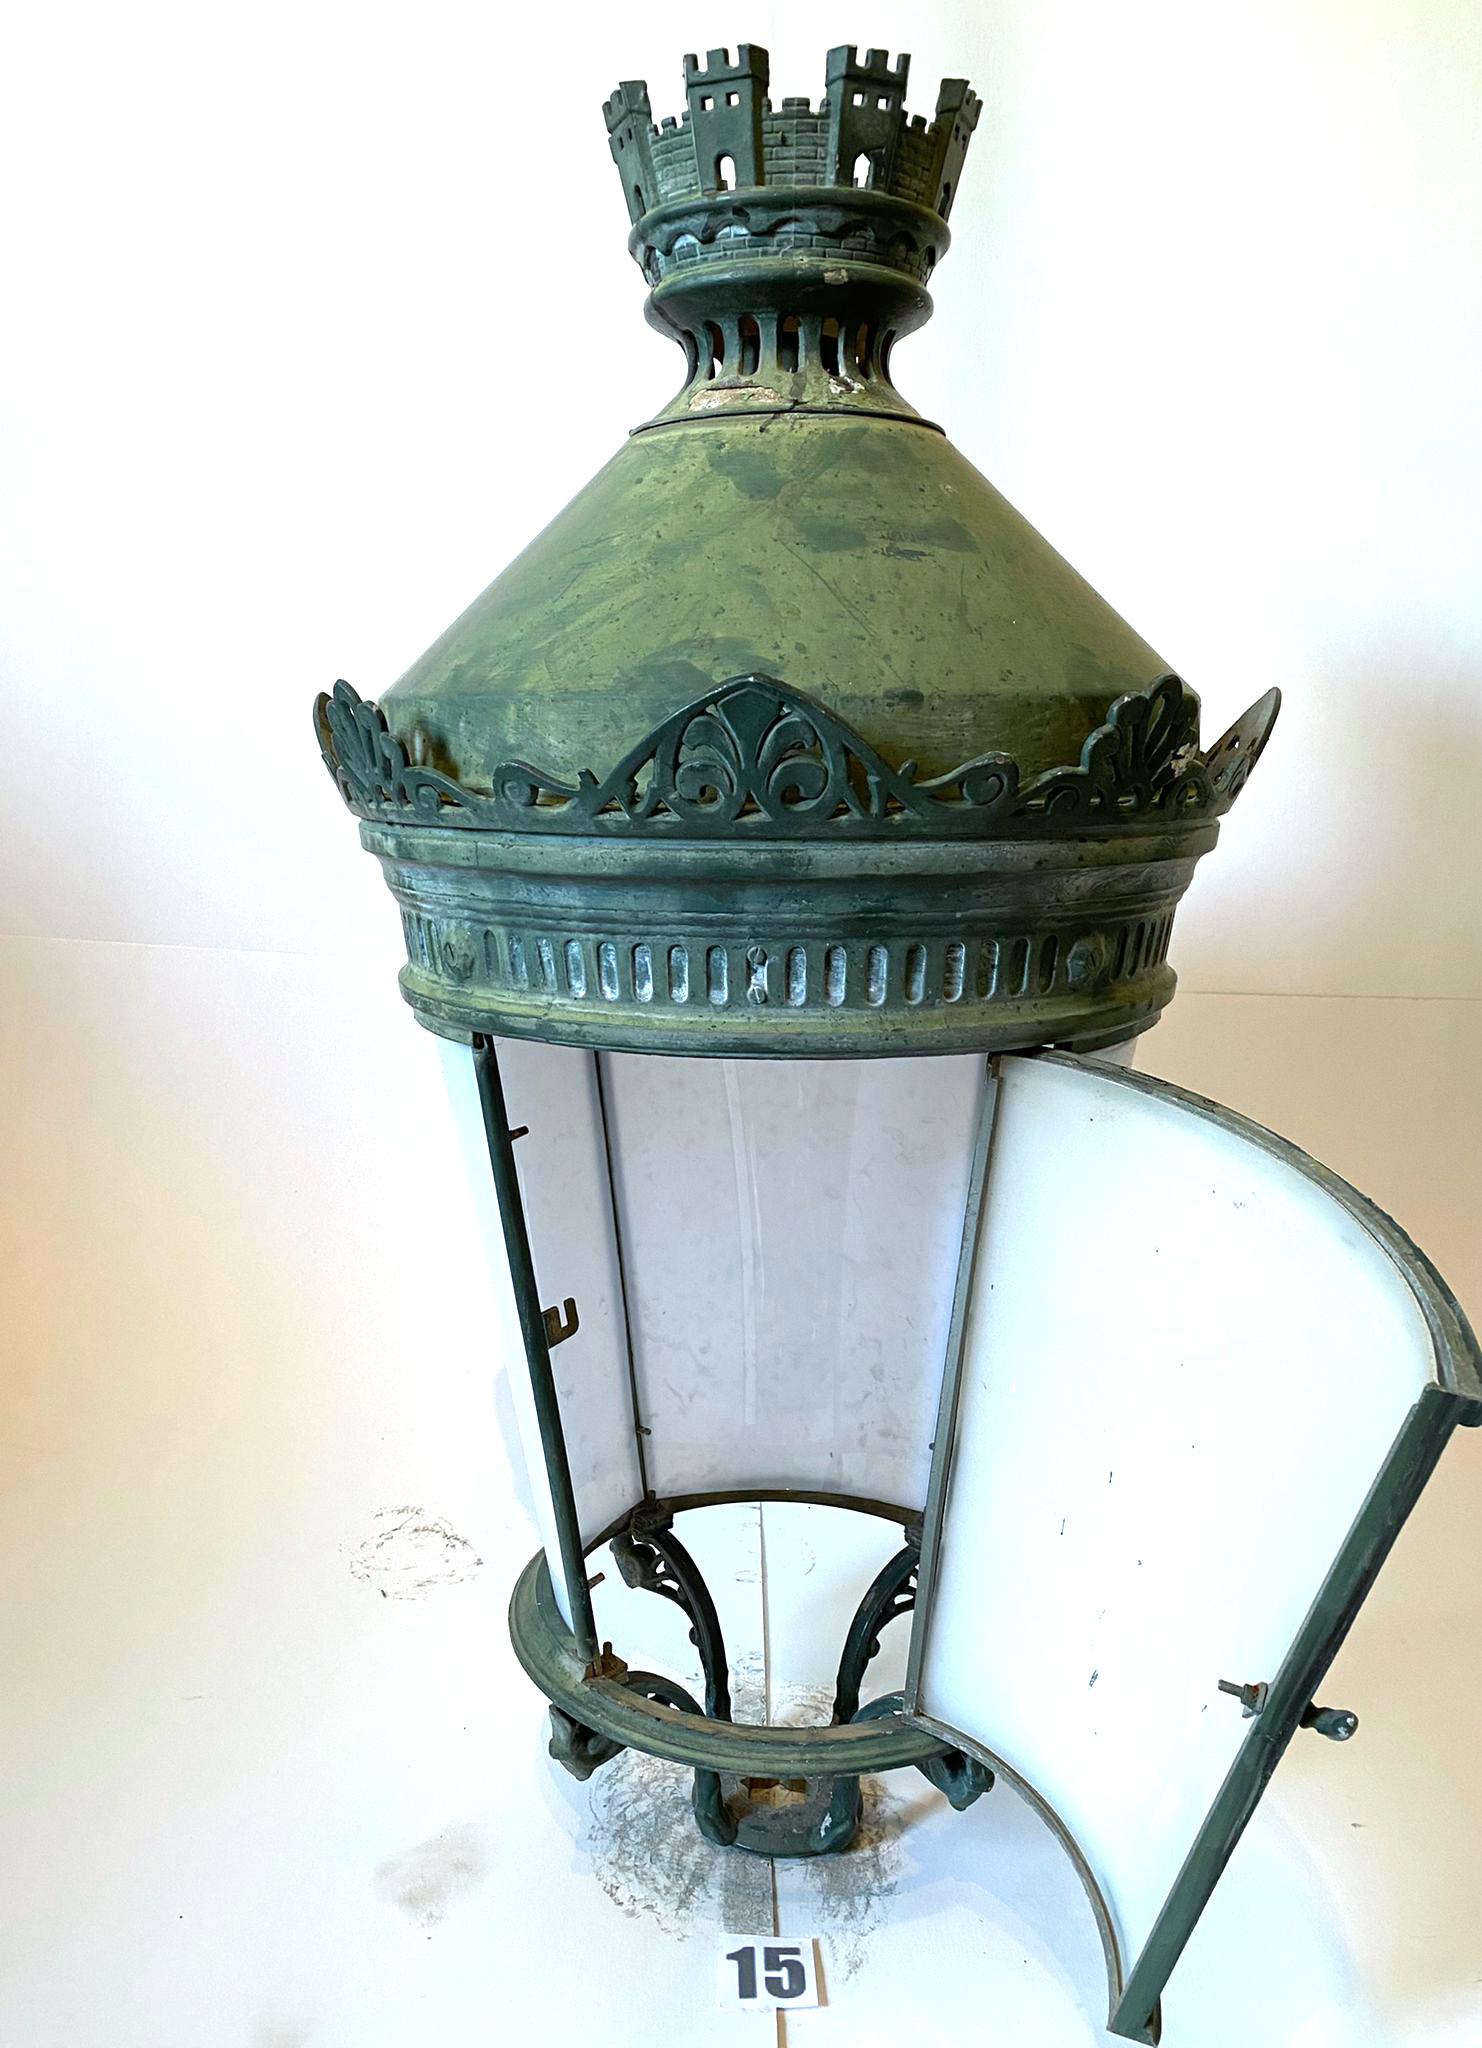 I'm offering a total of 29 Palatial Lanterns on my 1st Dibs store. 
 
****The Lantern pictured in this listing is LANTERN #15, and my restorer chose it as a PAIR with LANTERN #16 (listed separately). 
This lantern, LANTERN #15, can be purchased